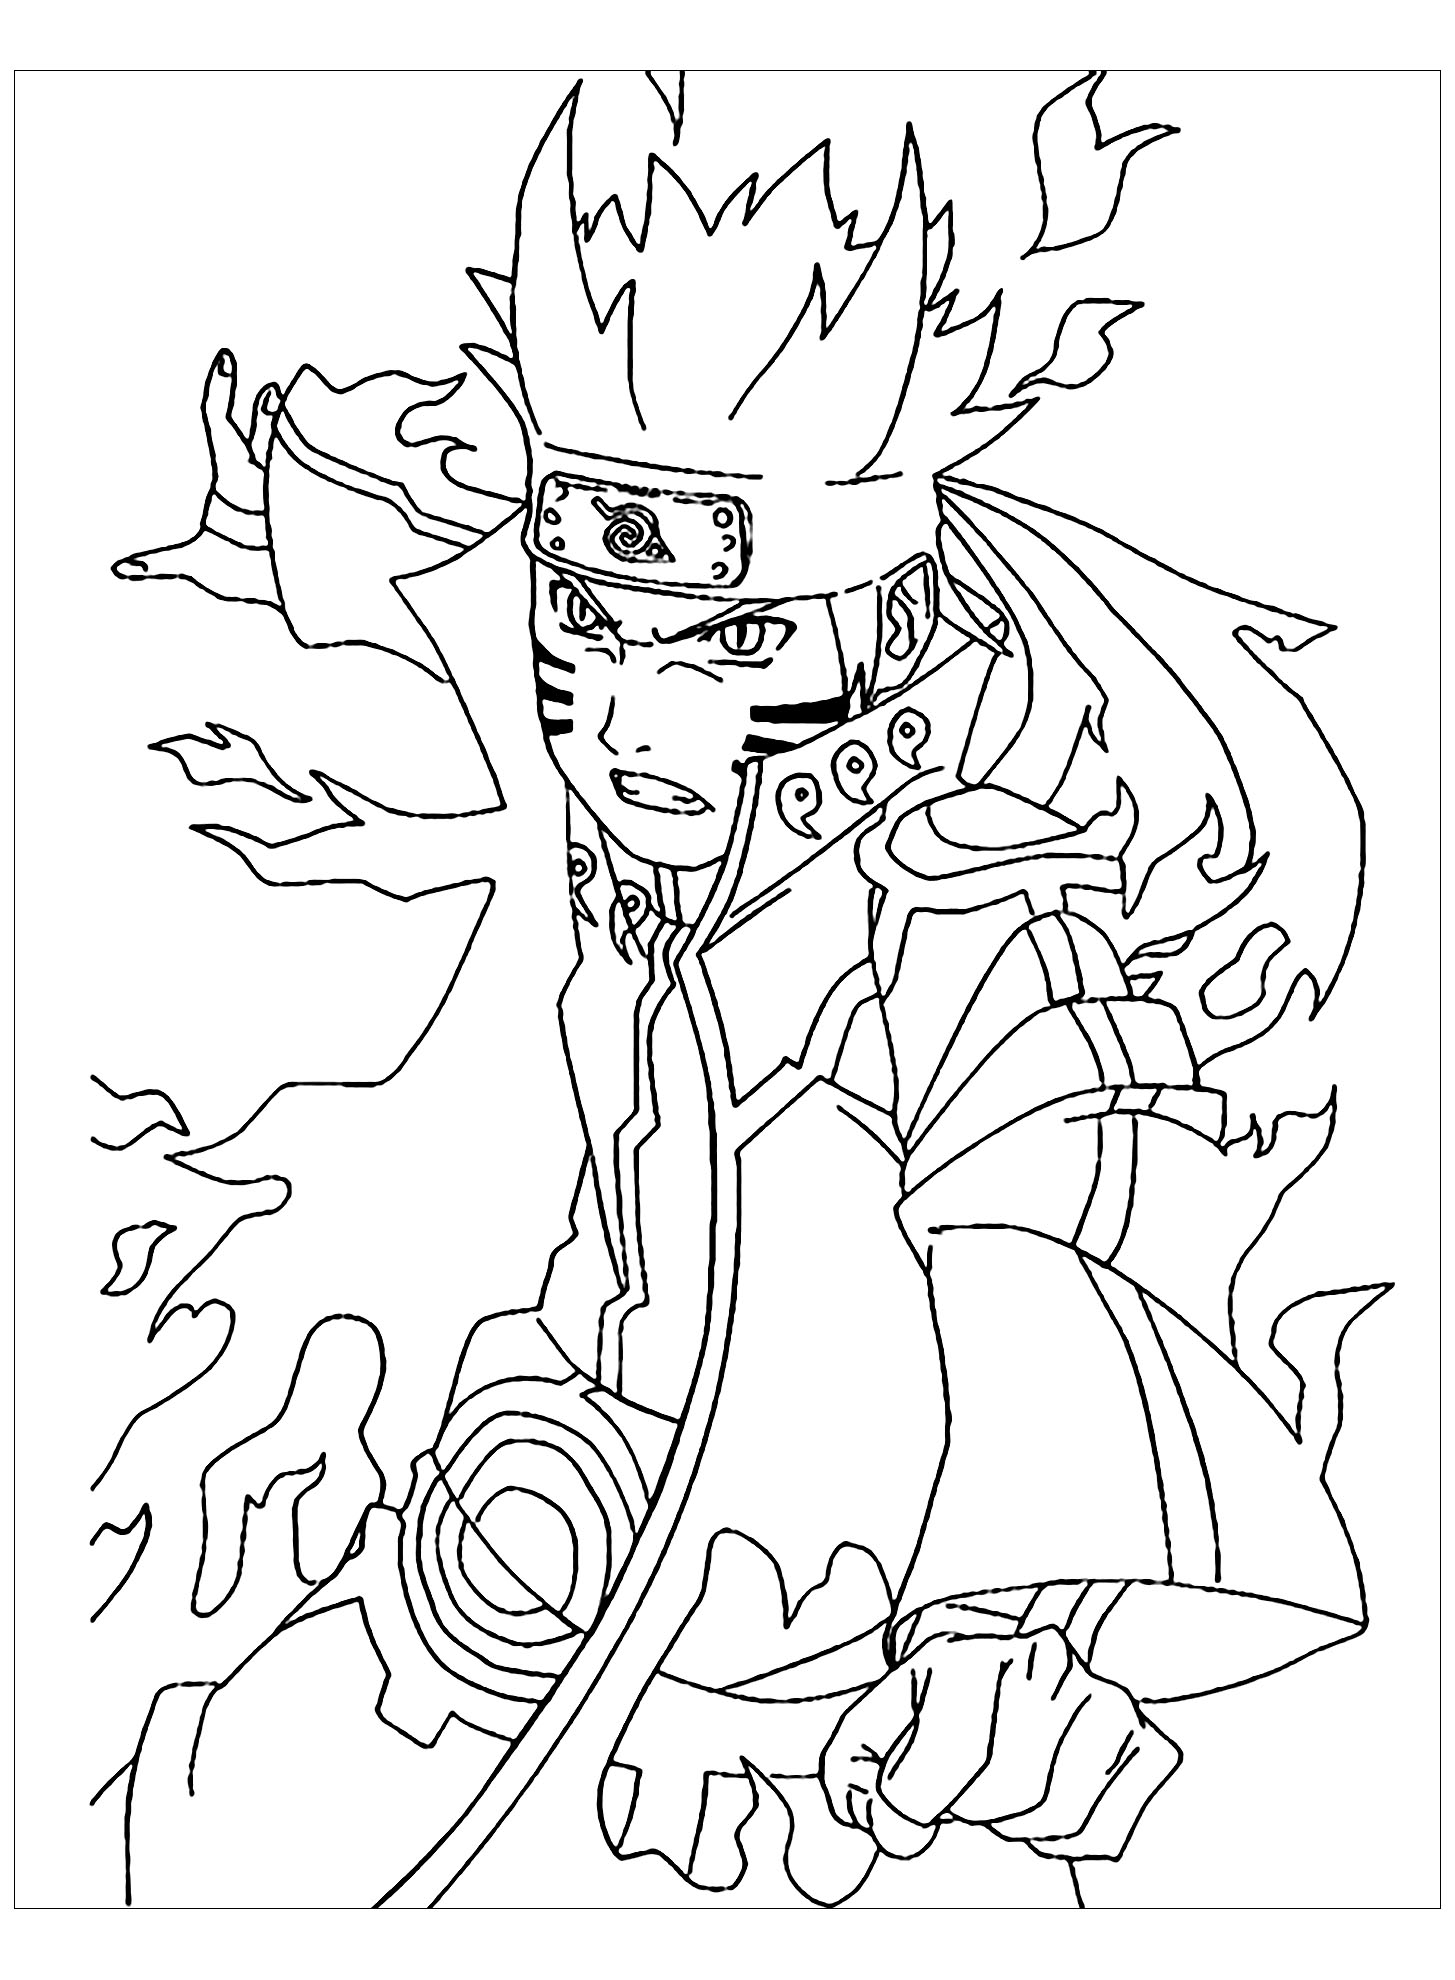 Download Naruto to download - Naruto Kids Coloring Pages